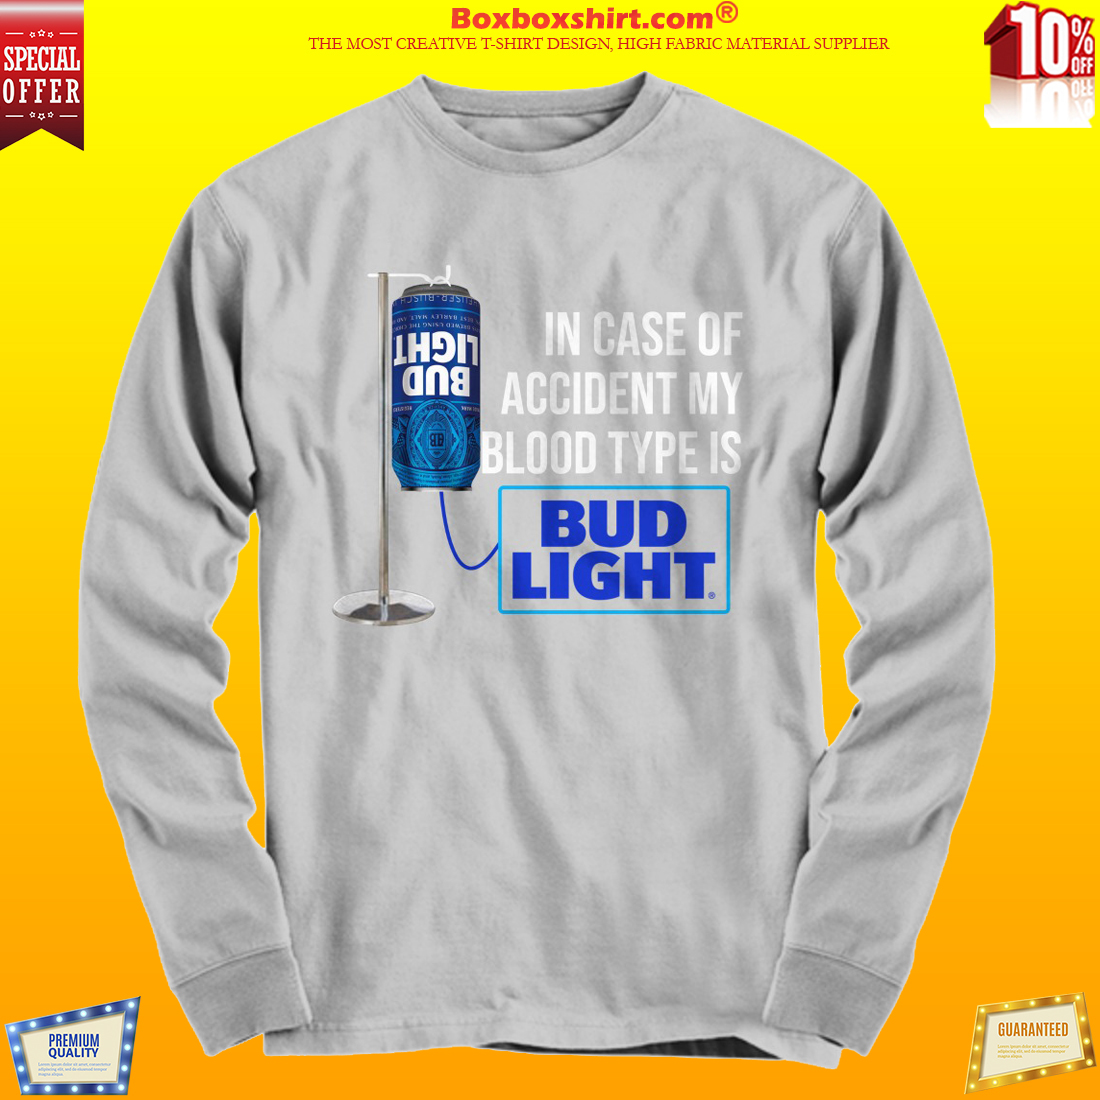 In case of accident my blood type is Bud Light t shirt and long sleeve tee